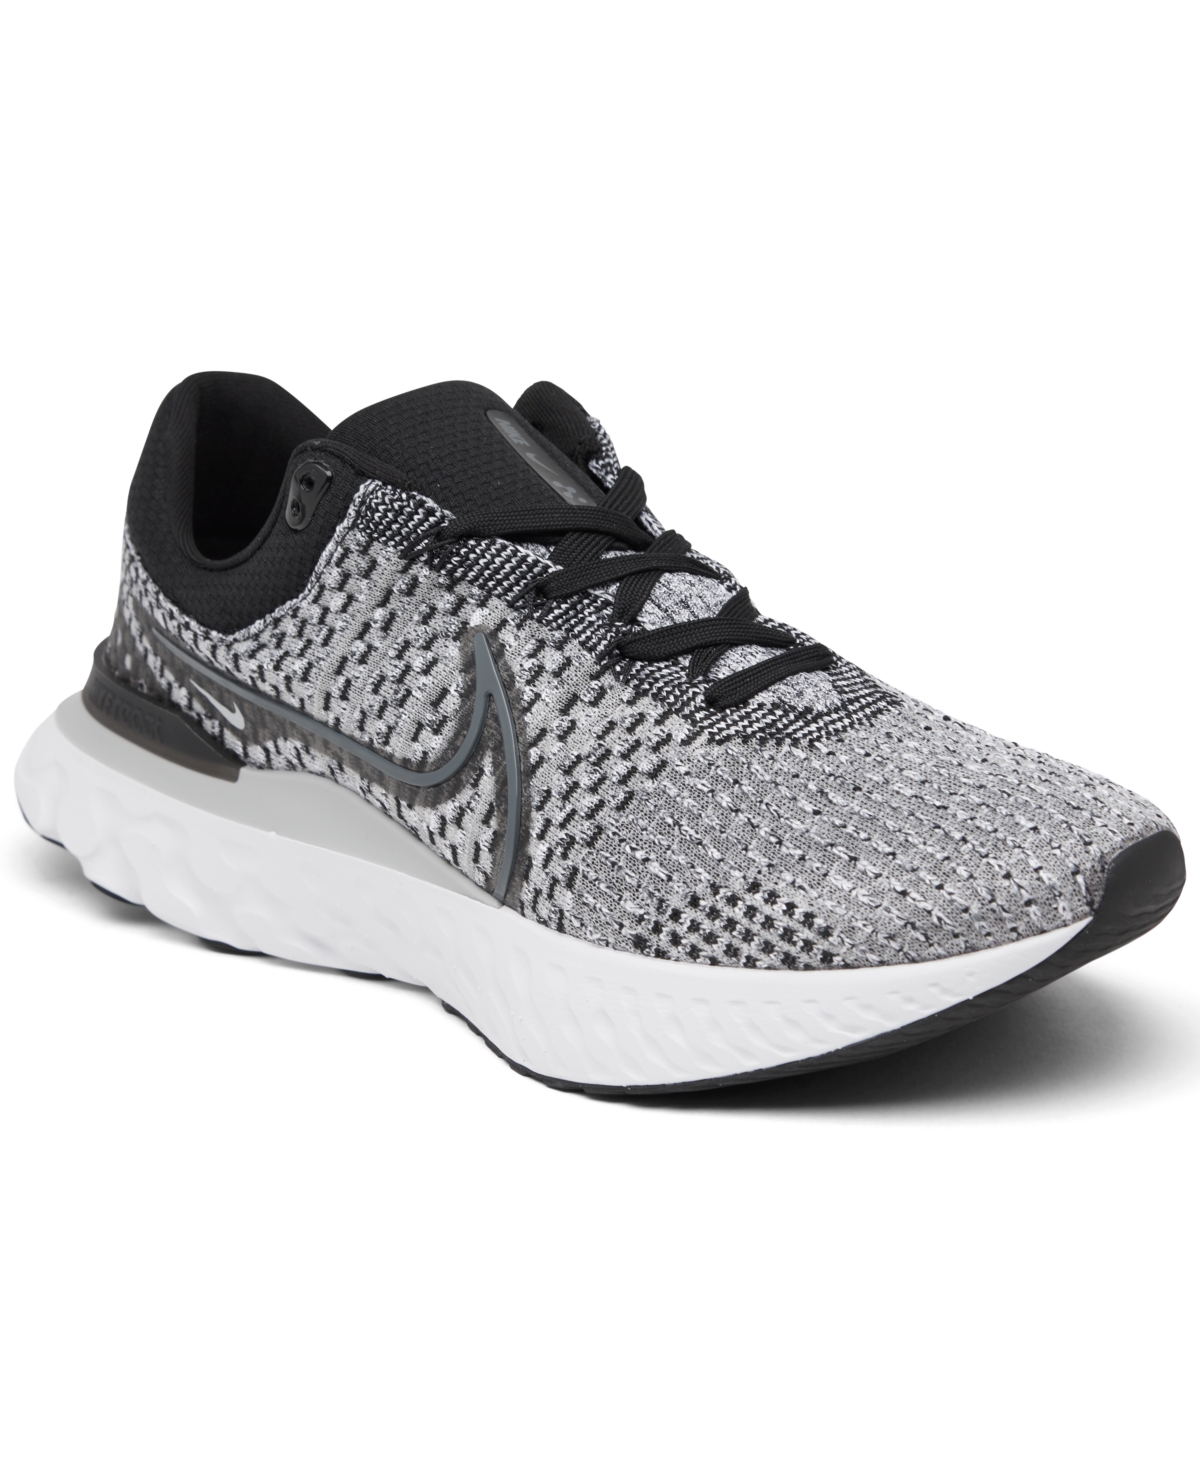 NIKE MEN'S REACT INFINITY RUN FLY KNIT 3 RUNNING SNEAKERS FROM FINISH LINE